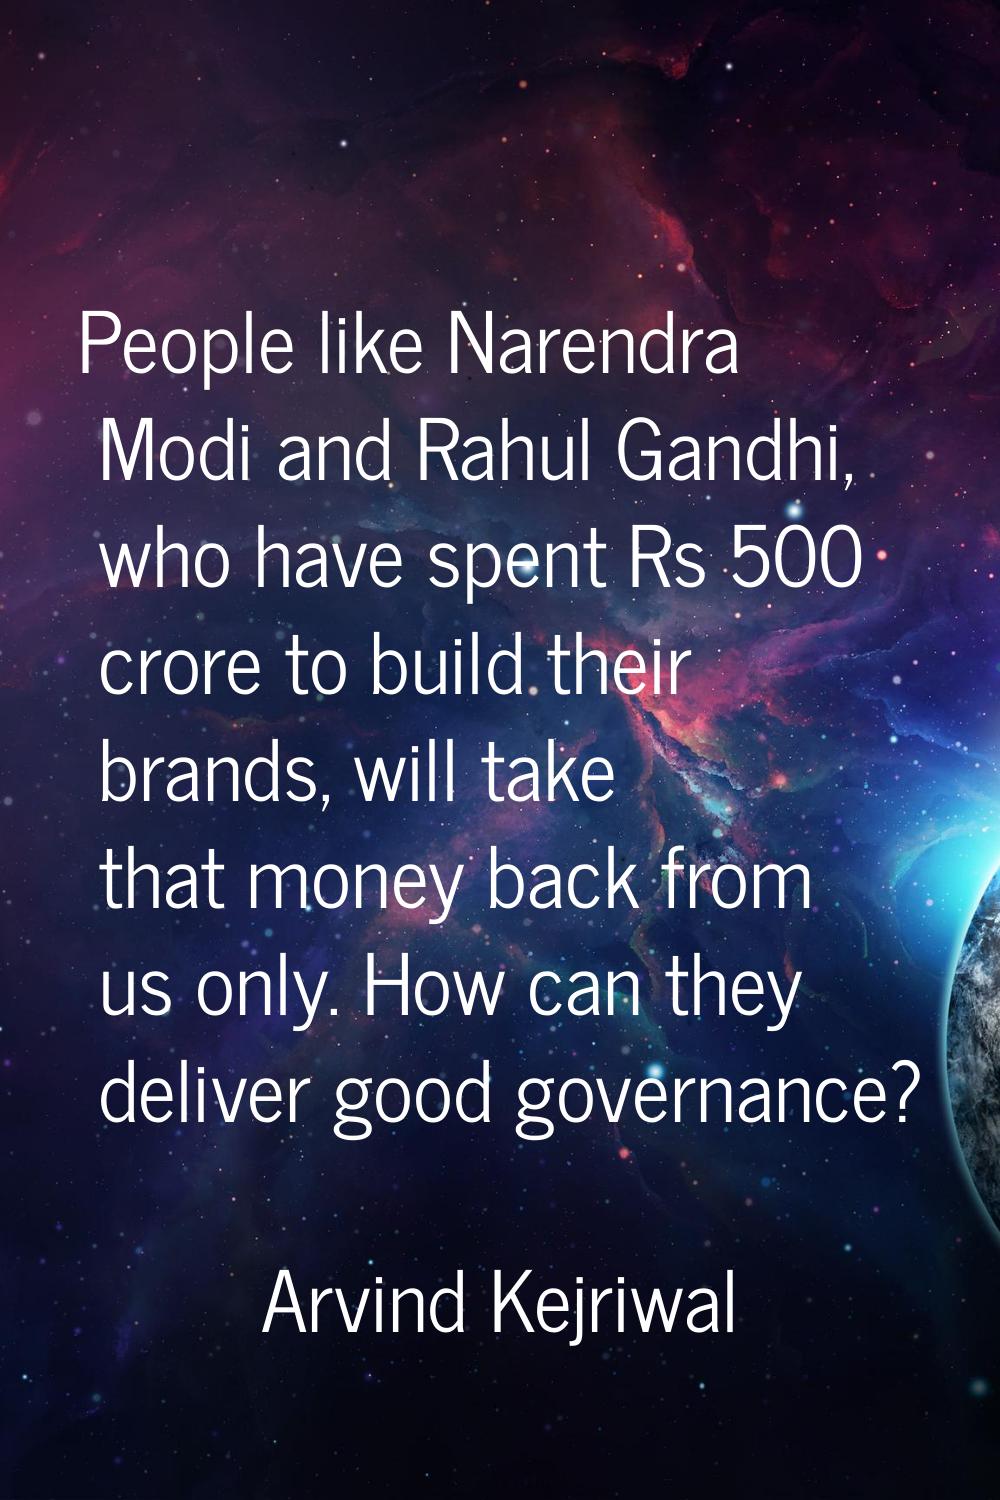 People like Narendra Modi and Rahul Gandhi, who have spent Rs 500 crore to build their brands, will